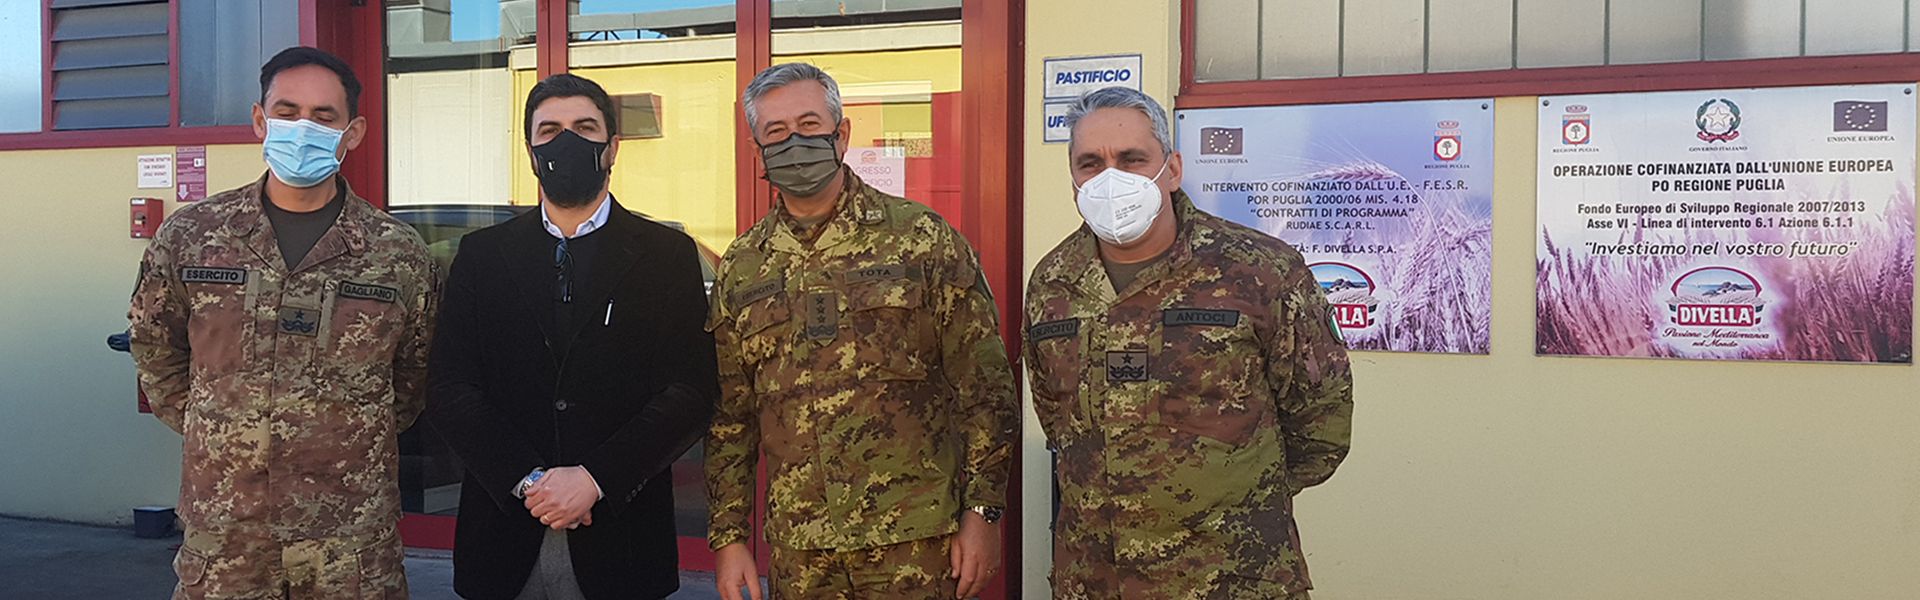 Representatives of the Italian Army visit the Divella factories